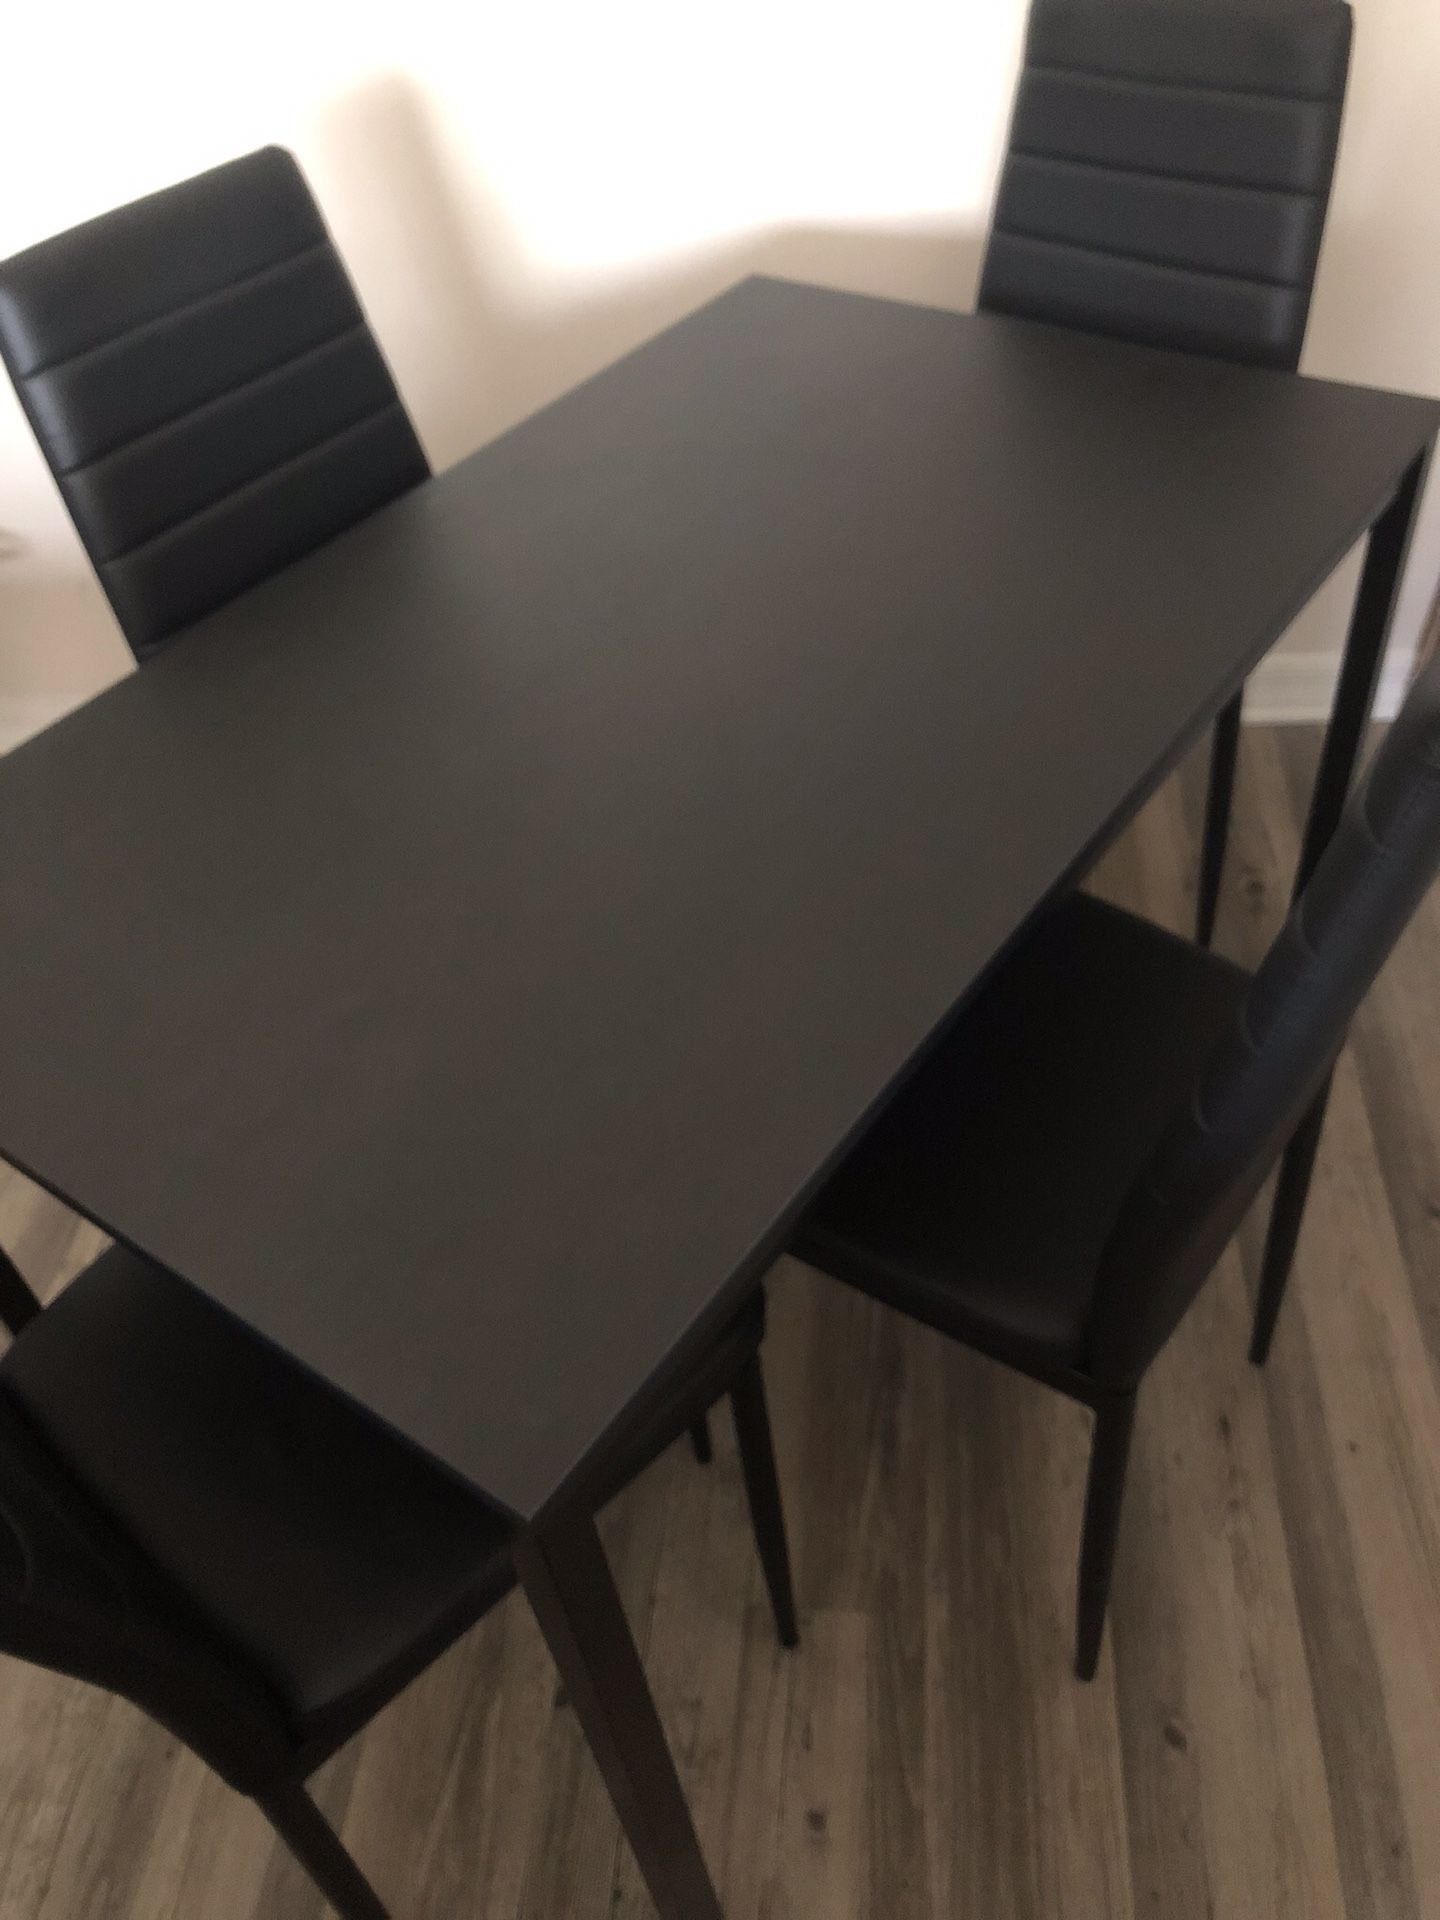 IKEA - Kitchen Dining Room Table + Four (4) Dining Chairs (Like New!)